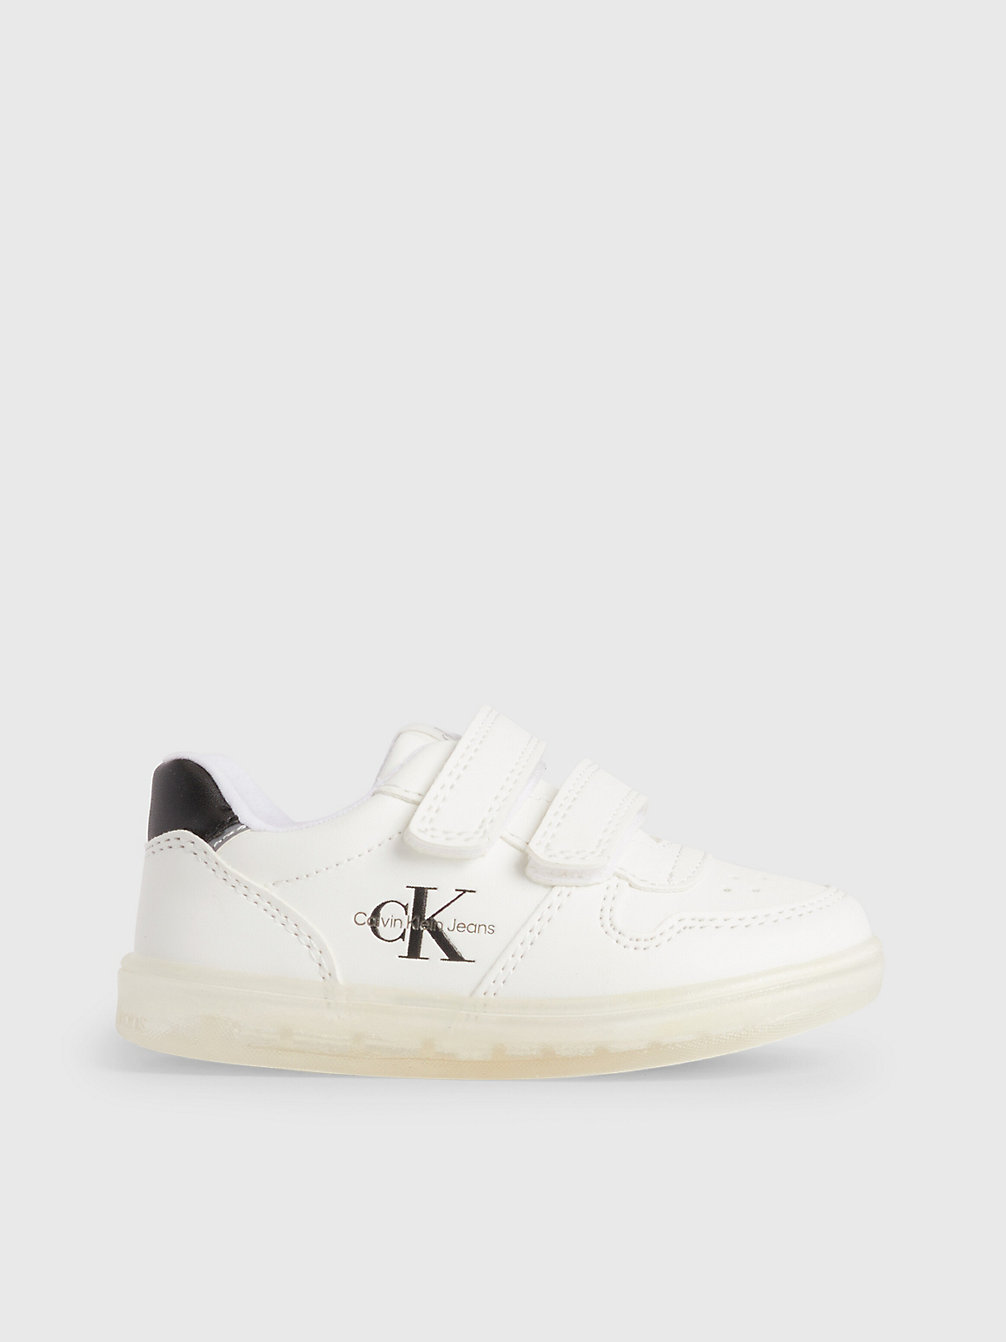 WHITE Toddlers And Kids Velcro Trainers undefined kids unisex Calvin Klein